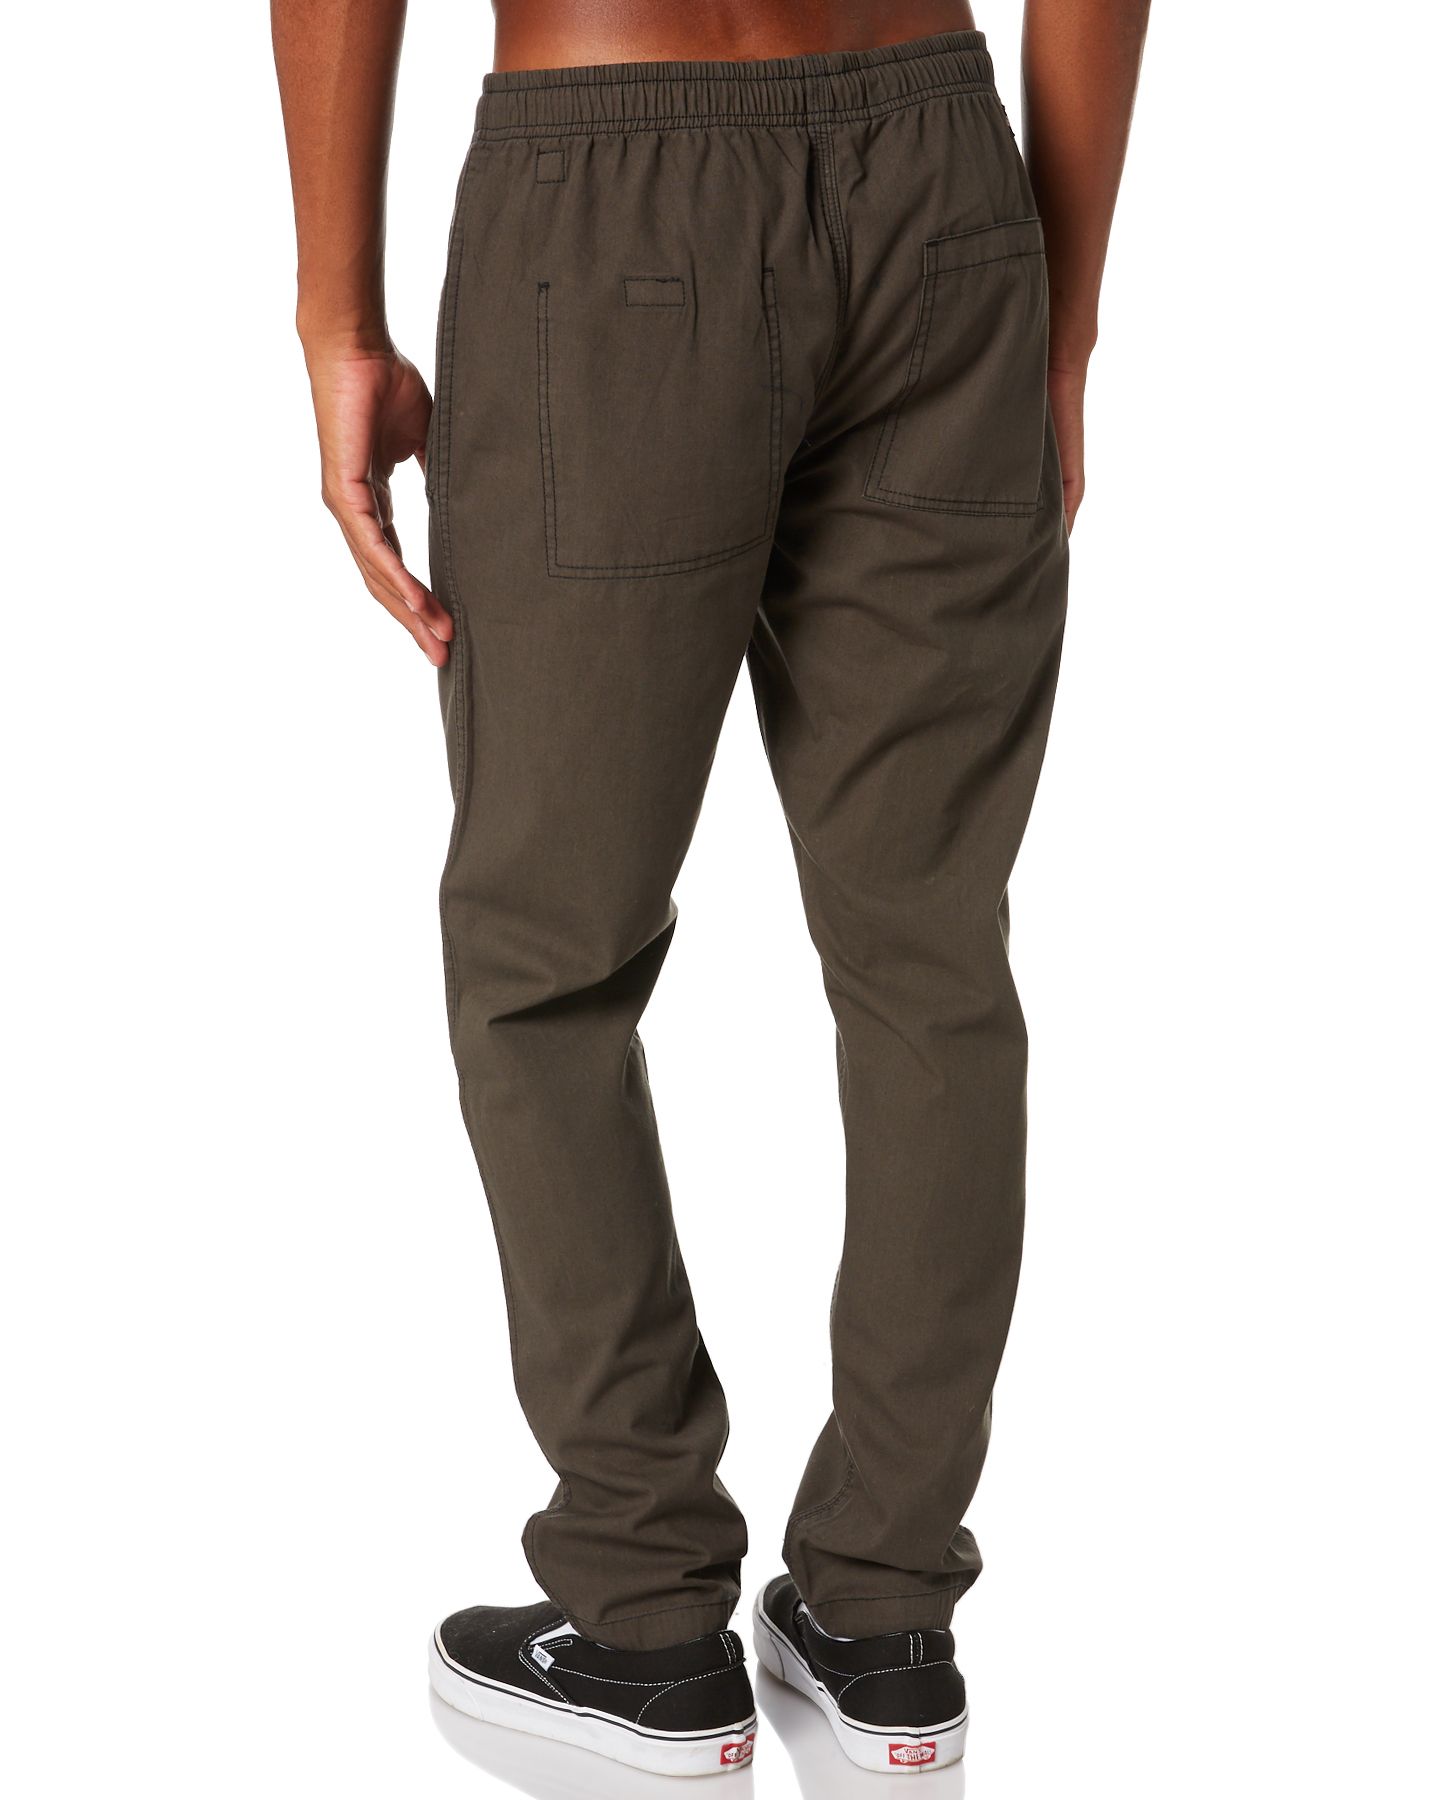 O'neill Switch Slack Mens Reversible Pant - Army Black | SurfStitch